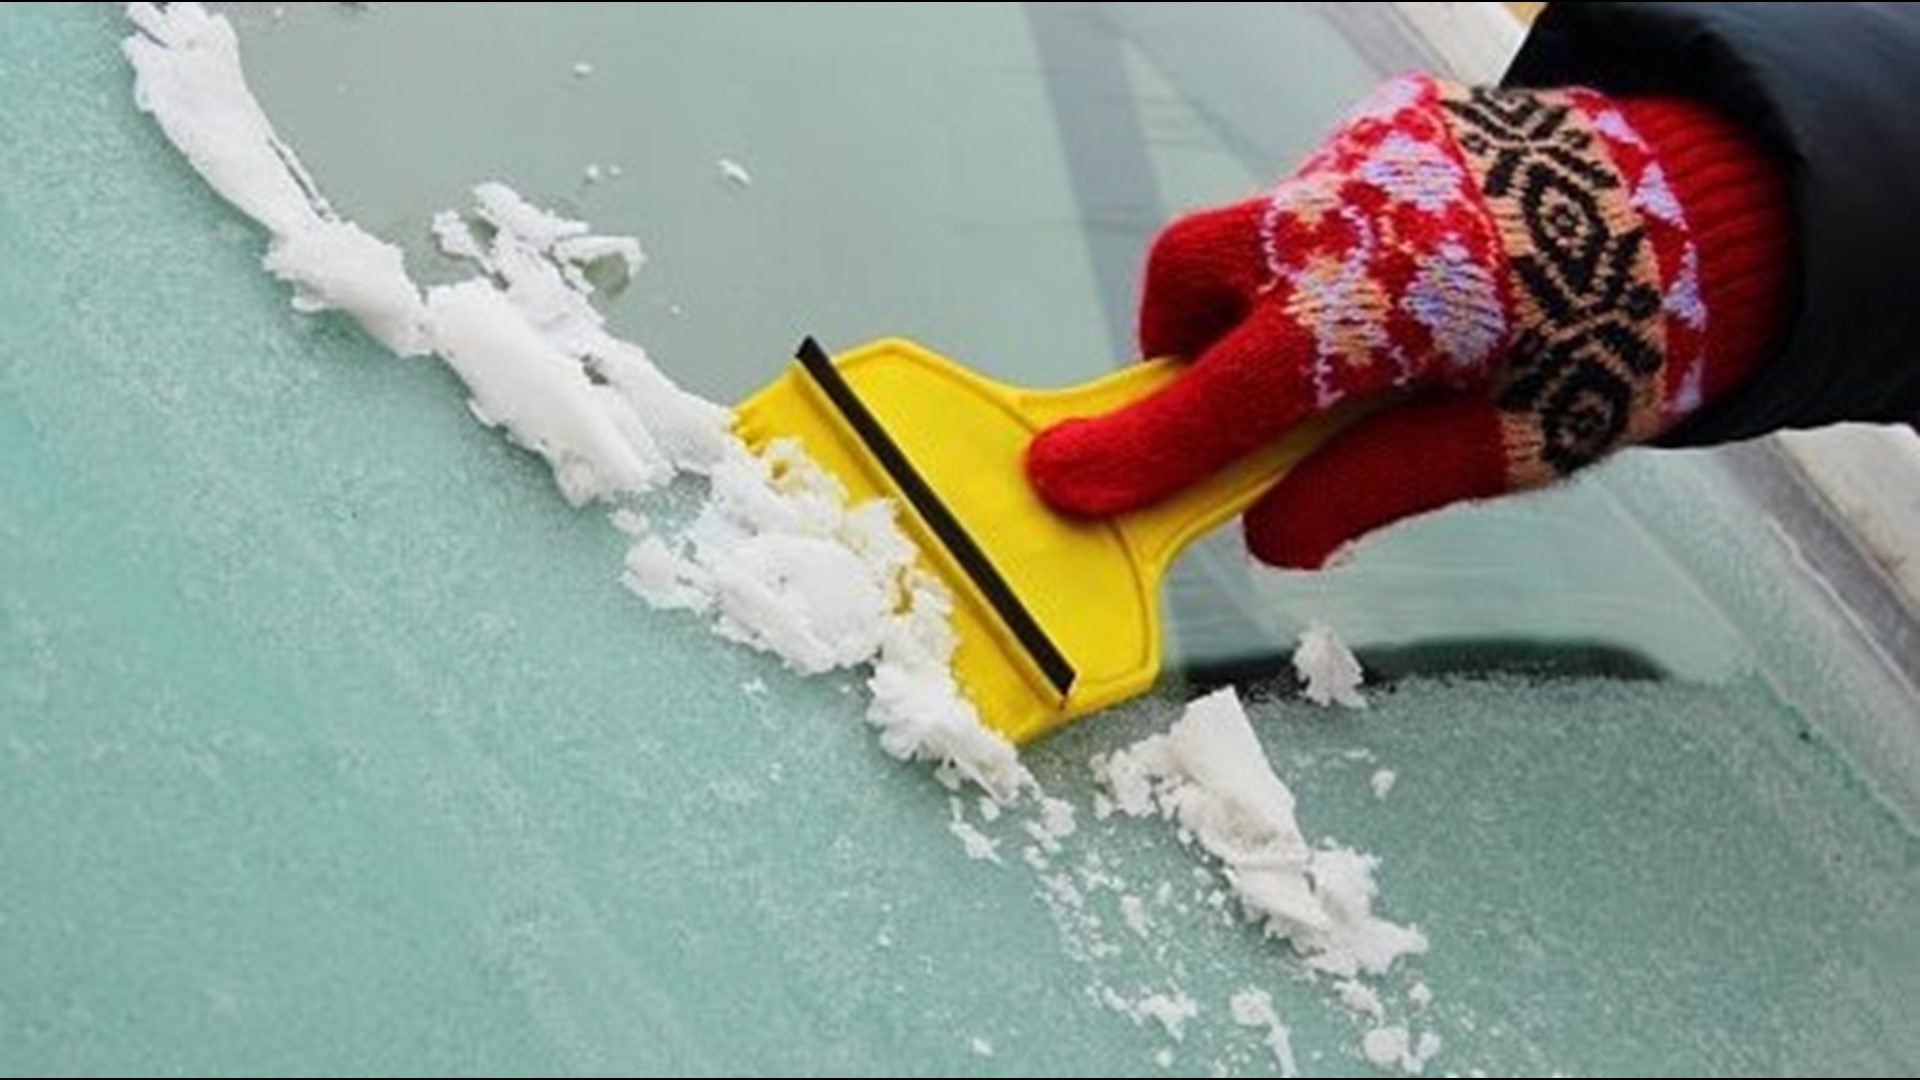 Ways to De-Ice Your Windshield Without Damaging It